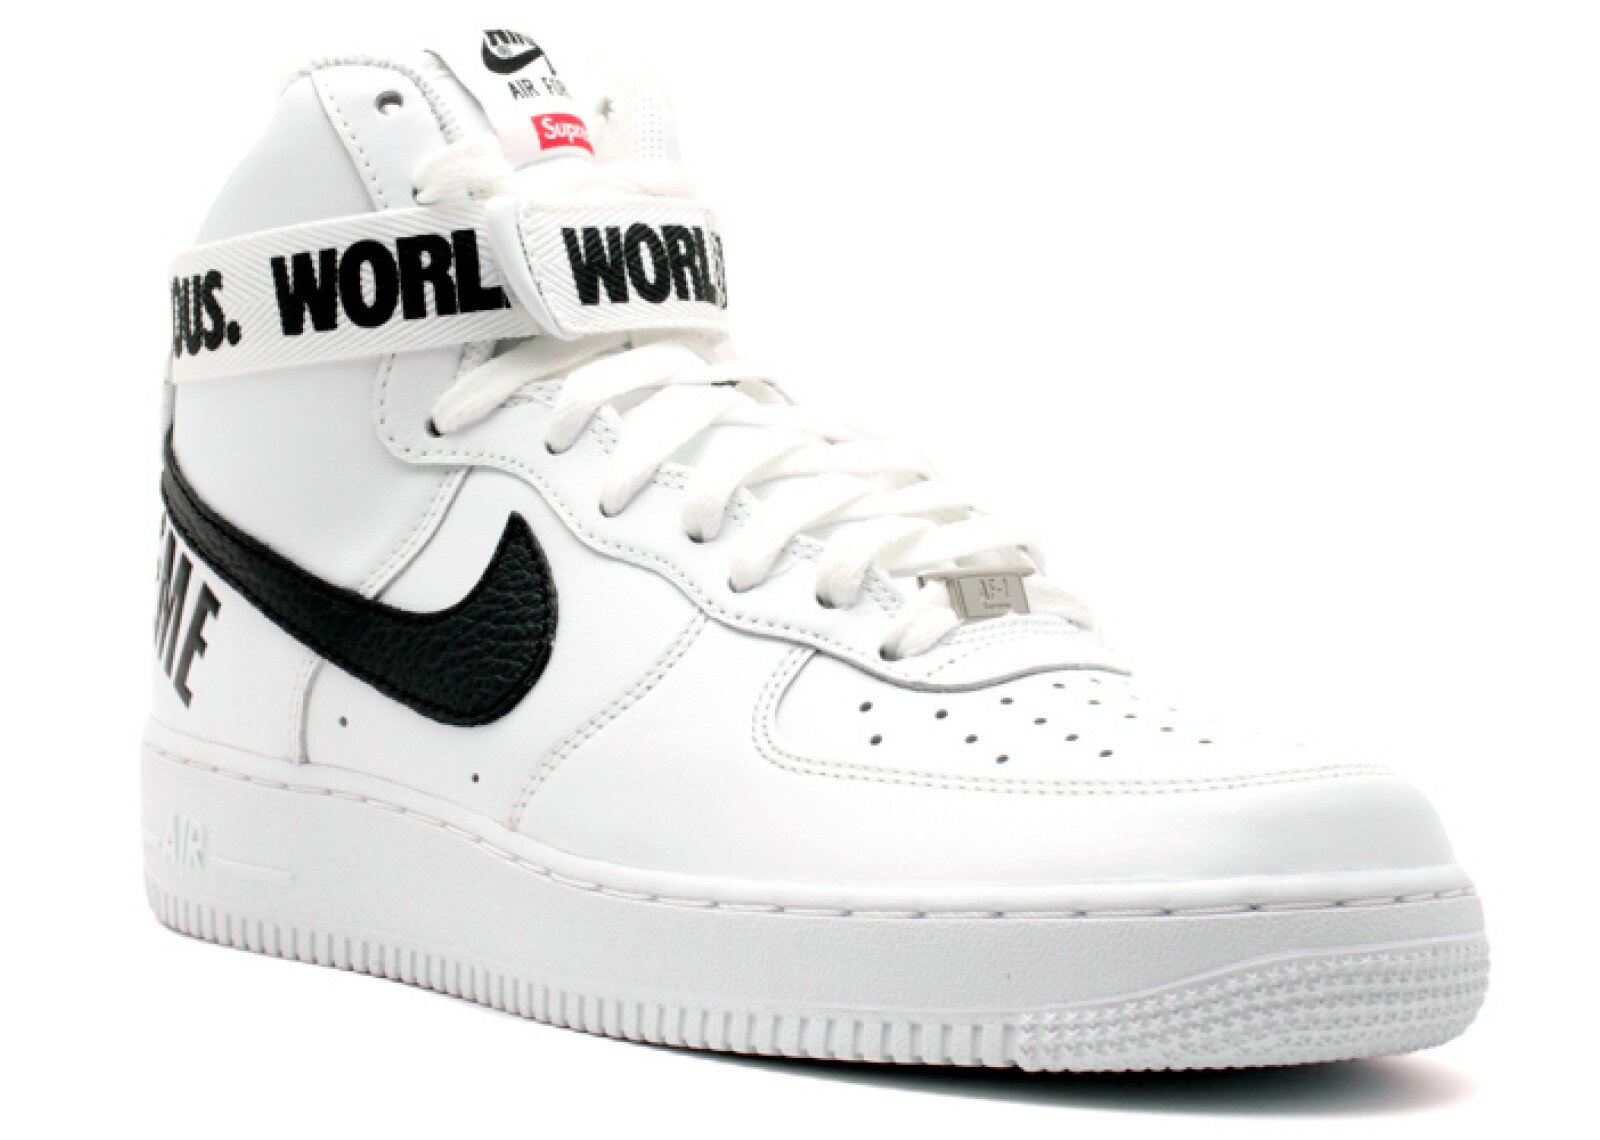 2018 New & Young | Shoes - Nike Air Force 1 - SB8.*_jofs - Men's brand shoes online 2019 2016 1992 2017